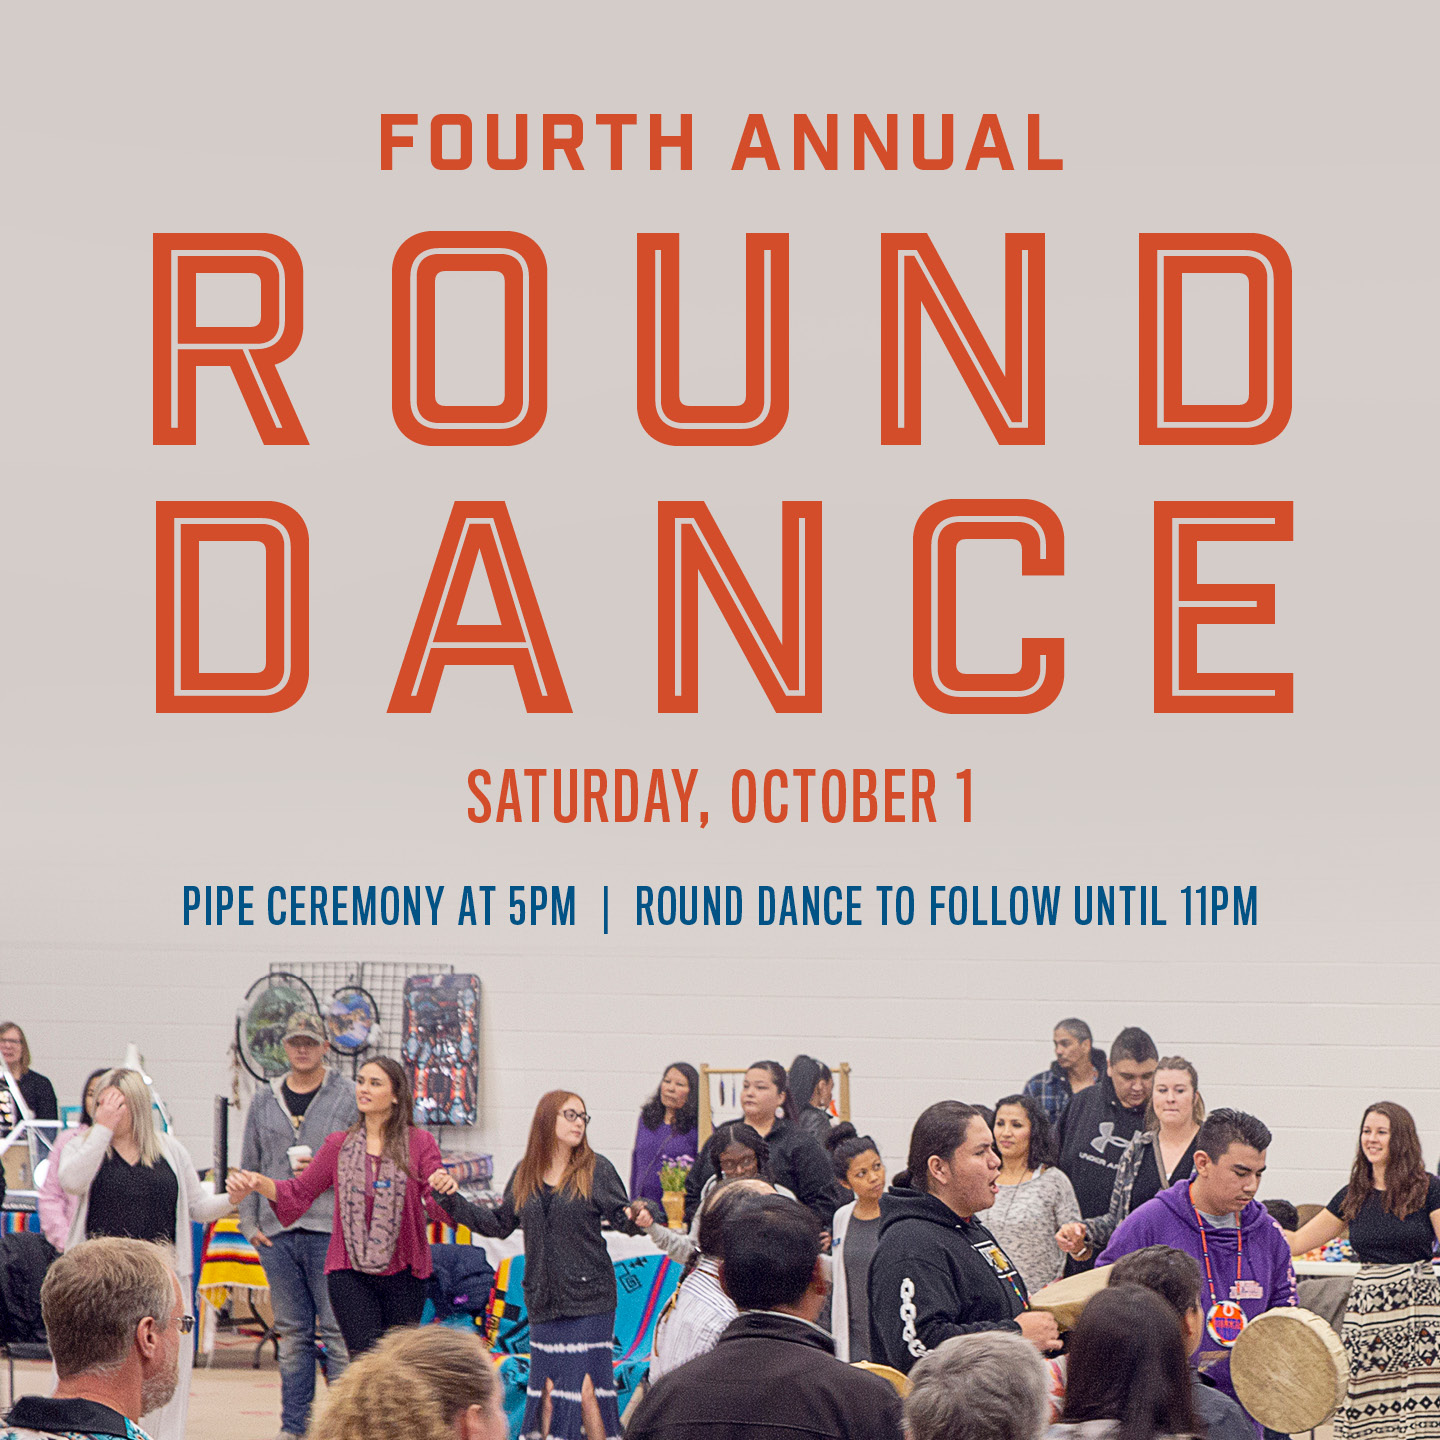 You’re Invited: CUE’s Annual Round Dance on Oct. 1st from 5 p.m. – 11 p.m